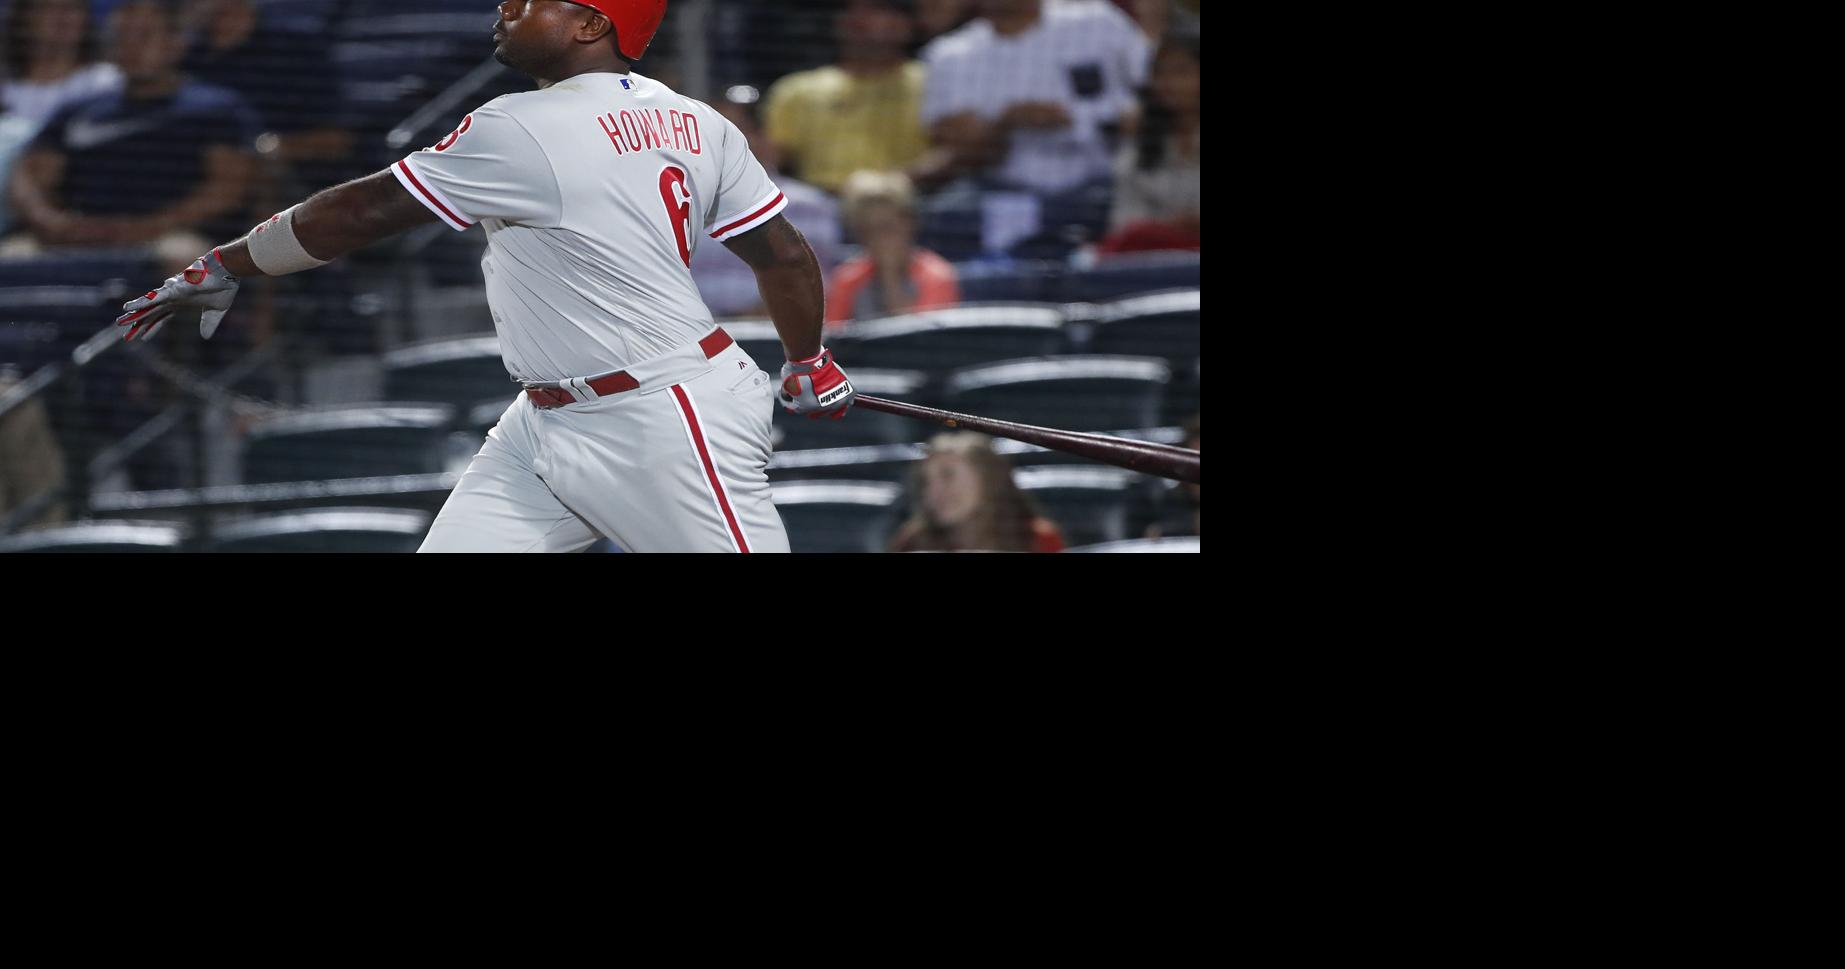 Ryan Howard will be remembered for impact in lineup and community, Sports